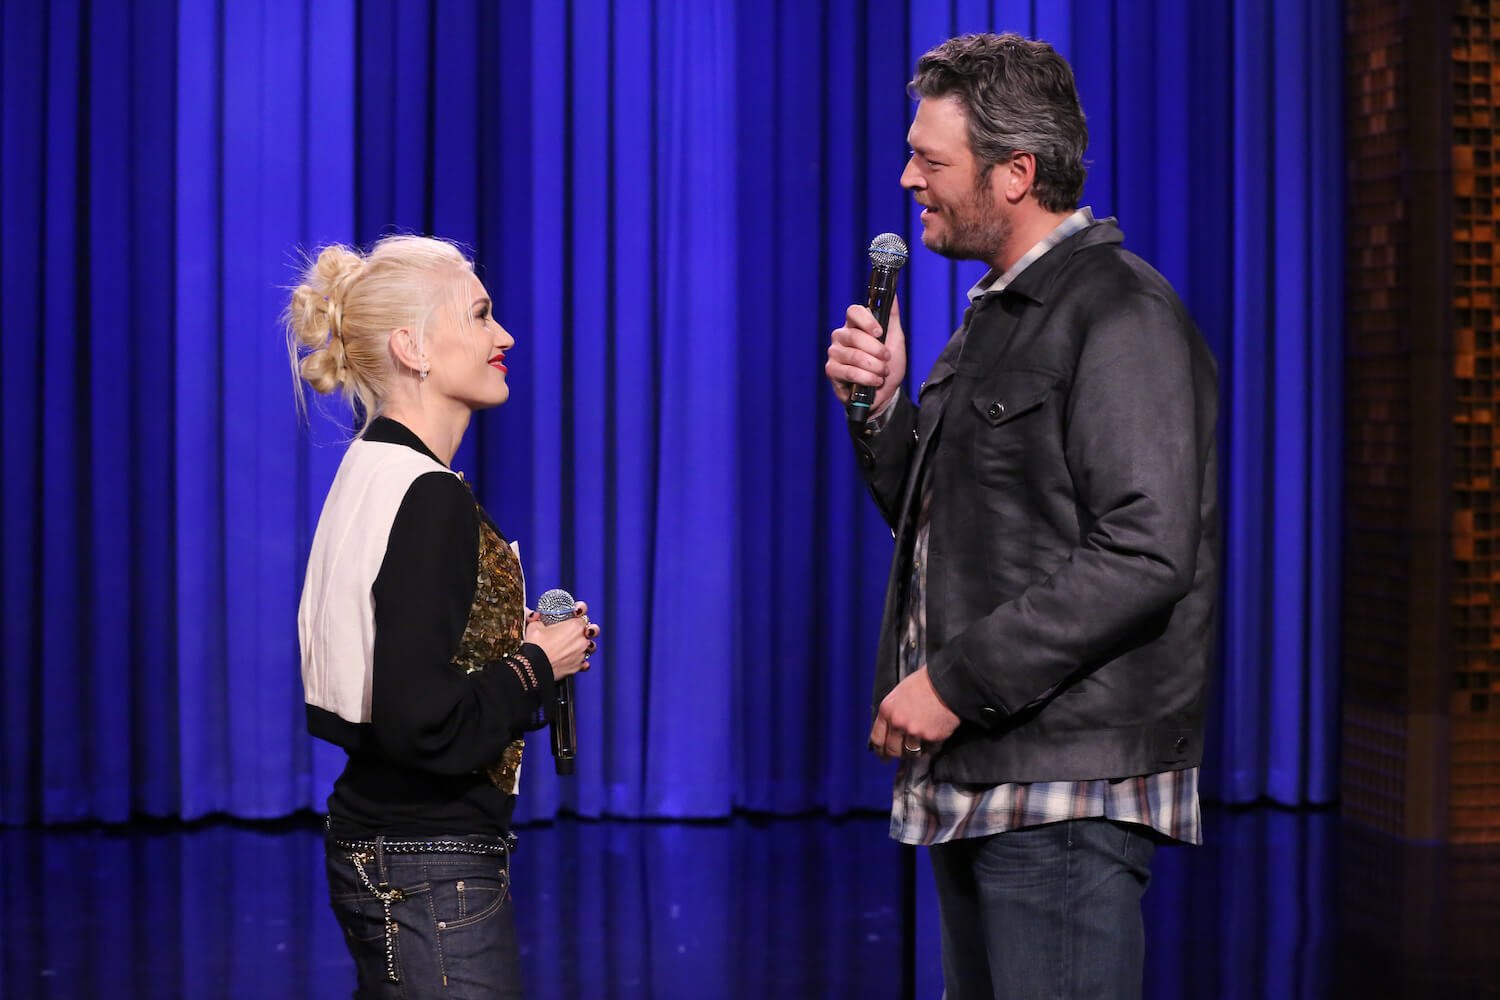 Gwen Stefani and Blake Shelton from 'The Voice' looking at each other